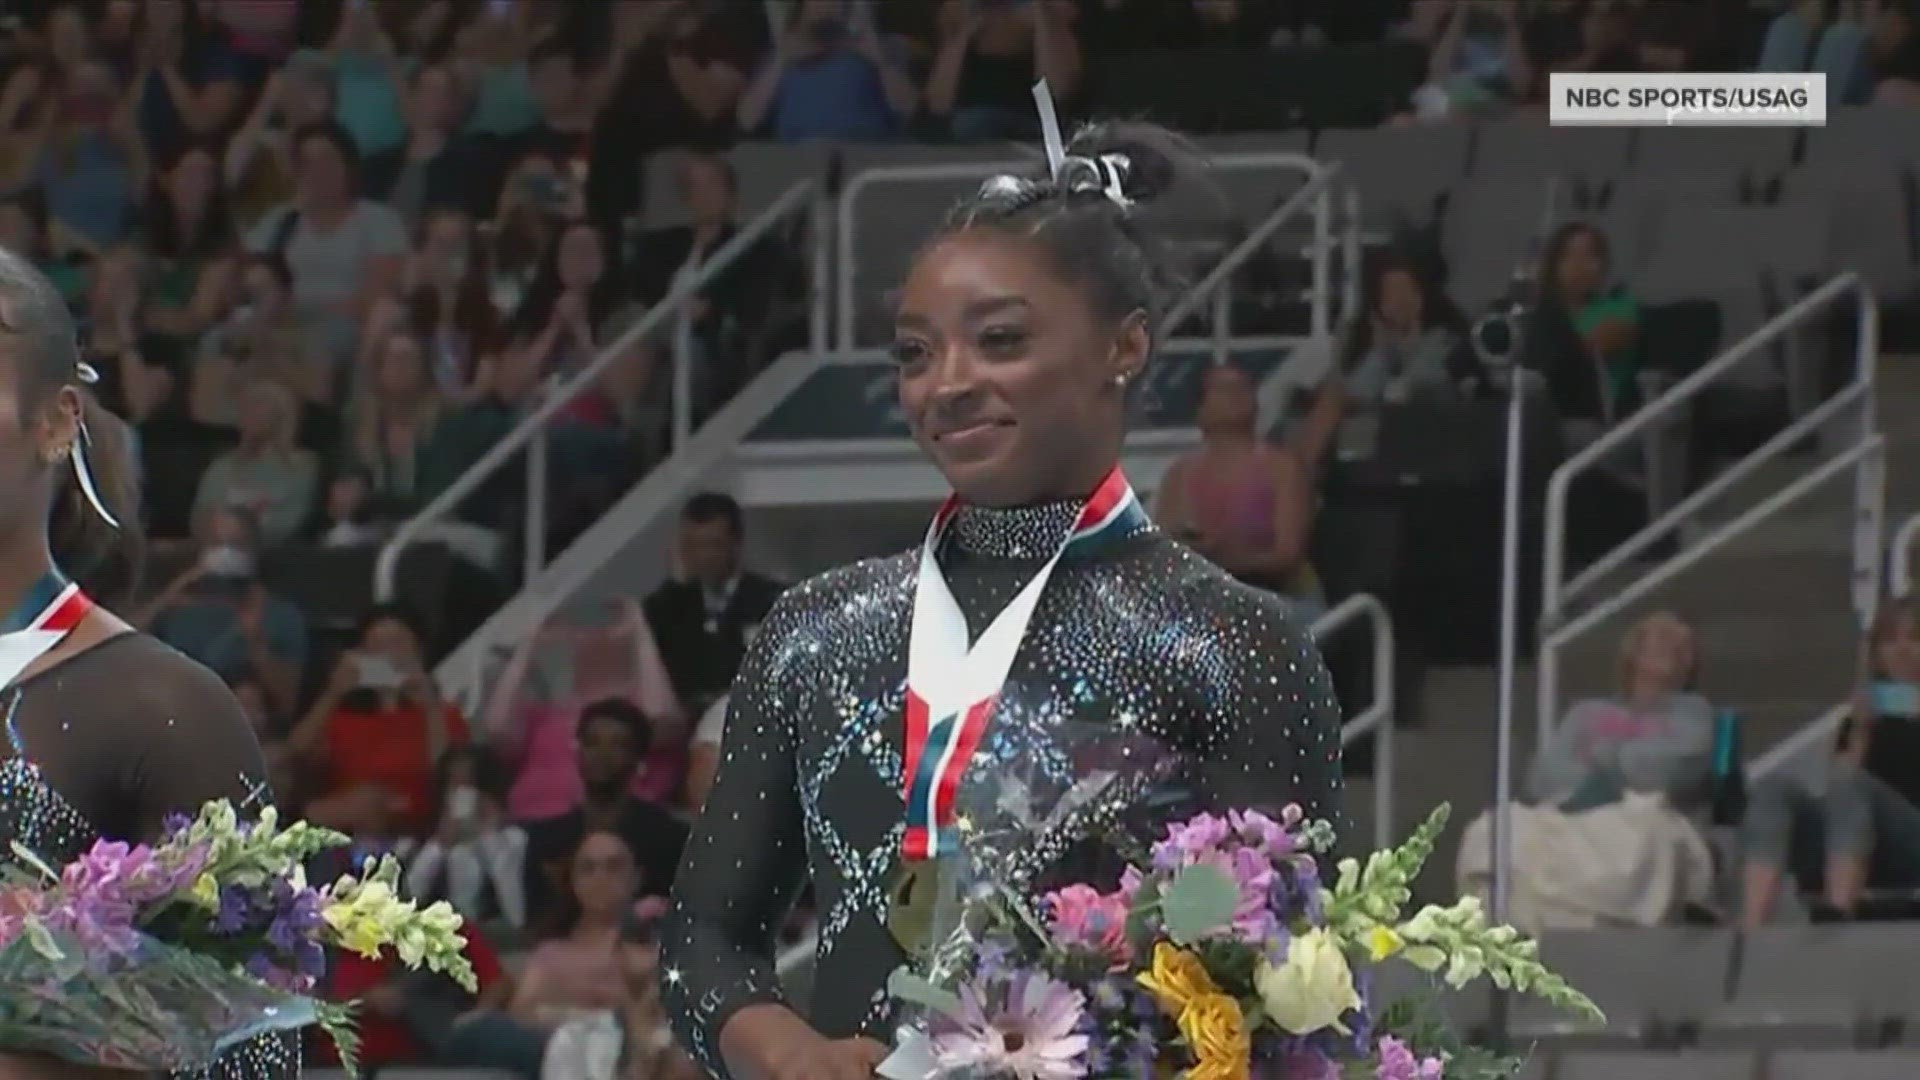 Biles served notice that even after a two-year break following the Tokyo Olympics, in gymnastics there is the GOAT and there is everyone else.